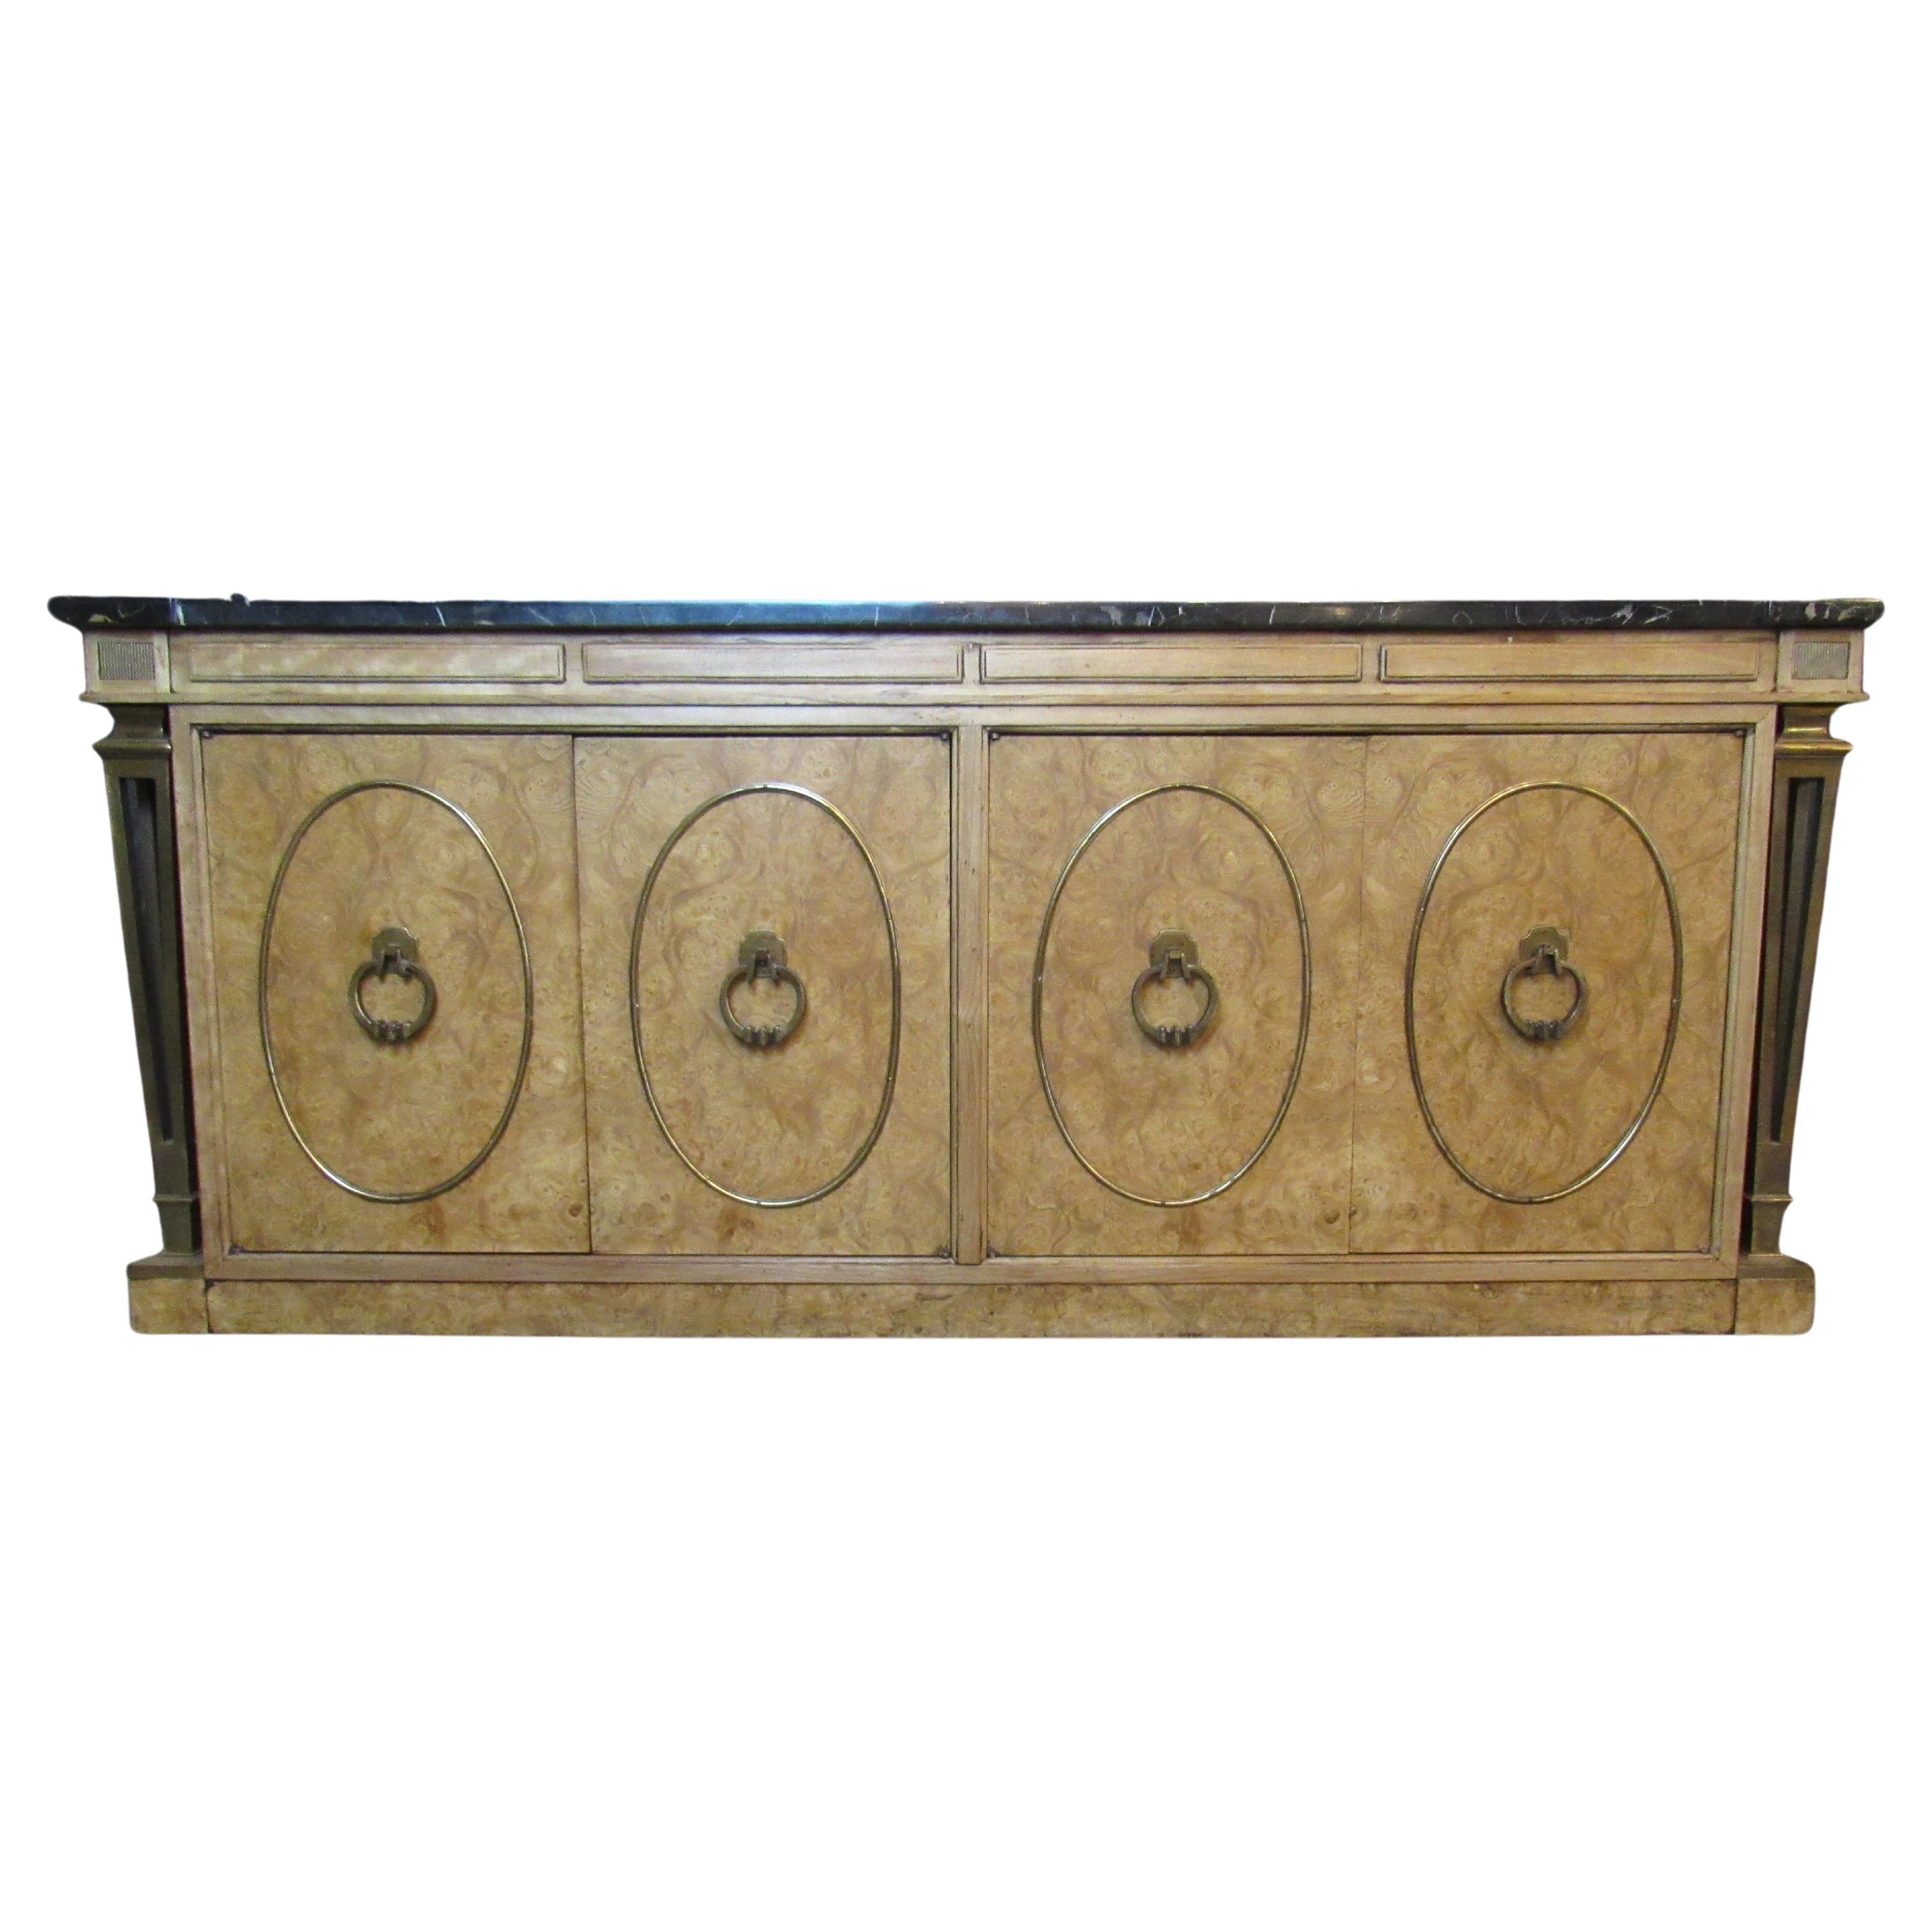 Bring home the timeless elegance of Michigan's Mastercraft Furniture with this genuinely stunning credenza made of marble, brass, and burl. Seamlessly blending the classic elements of Mid-Century Modern and Hollywood Regency design, while concealing